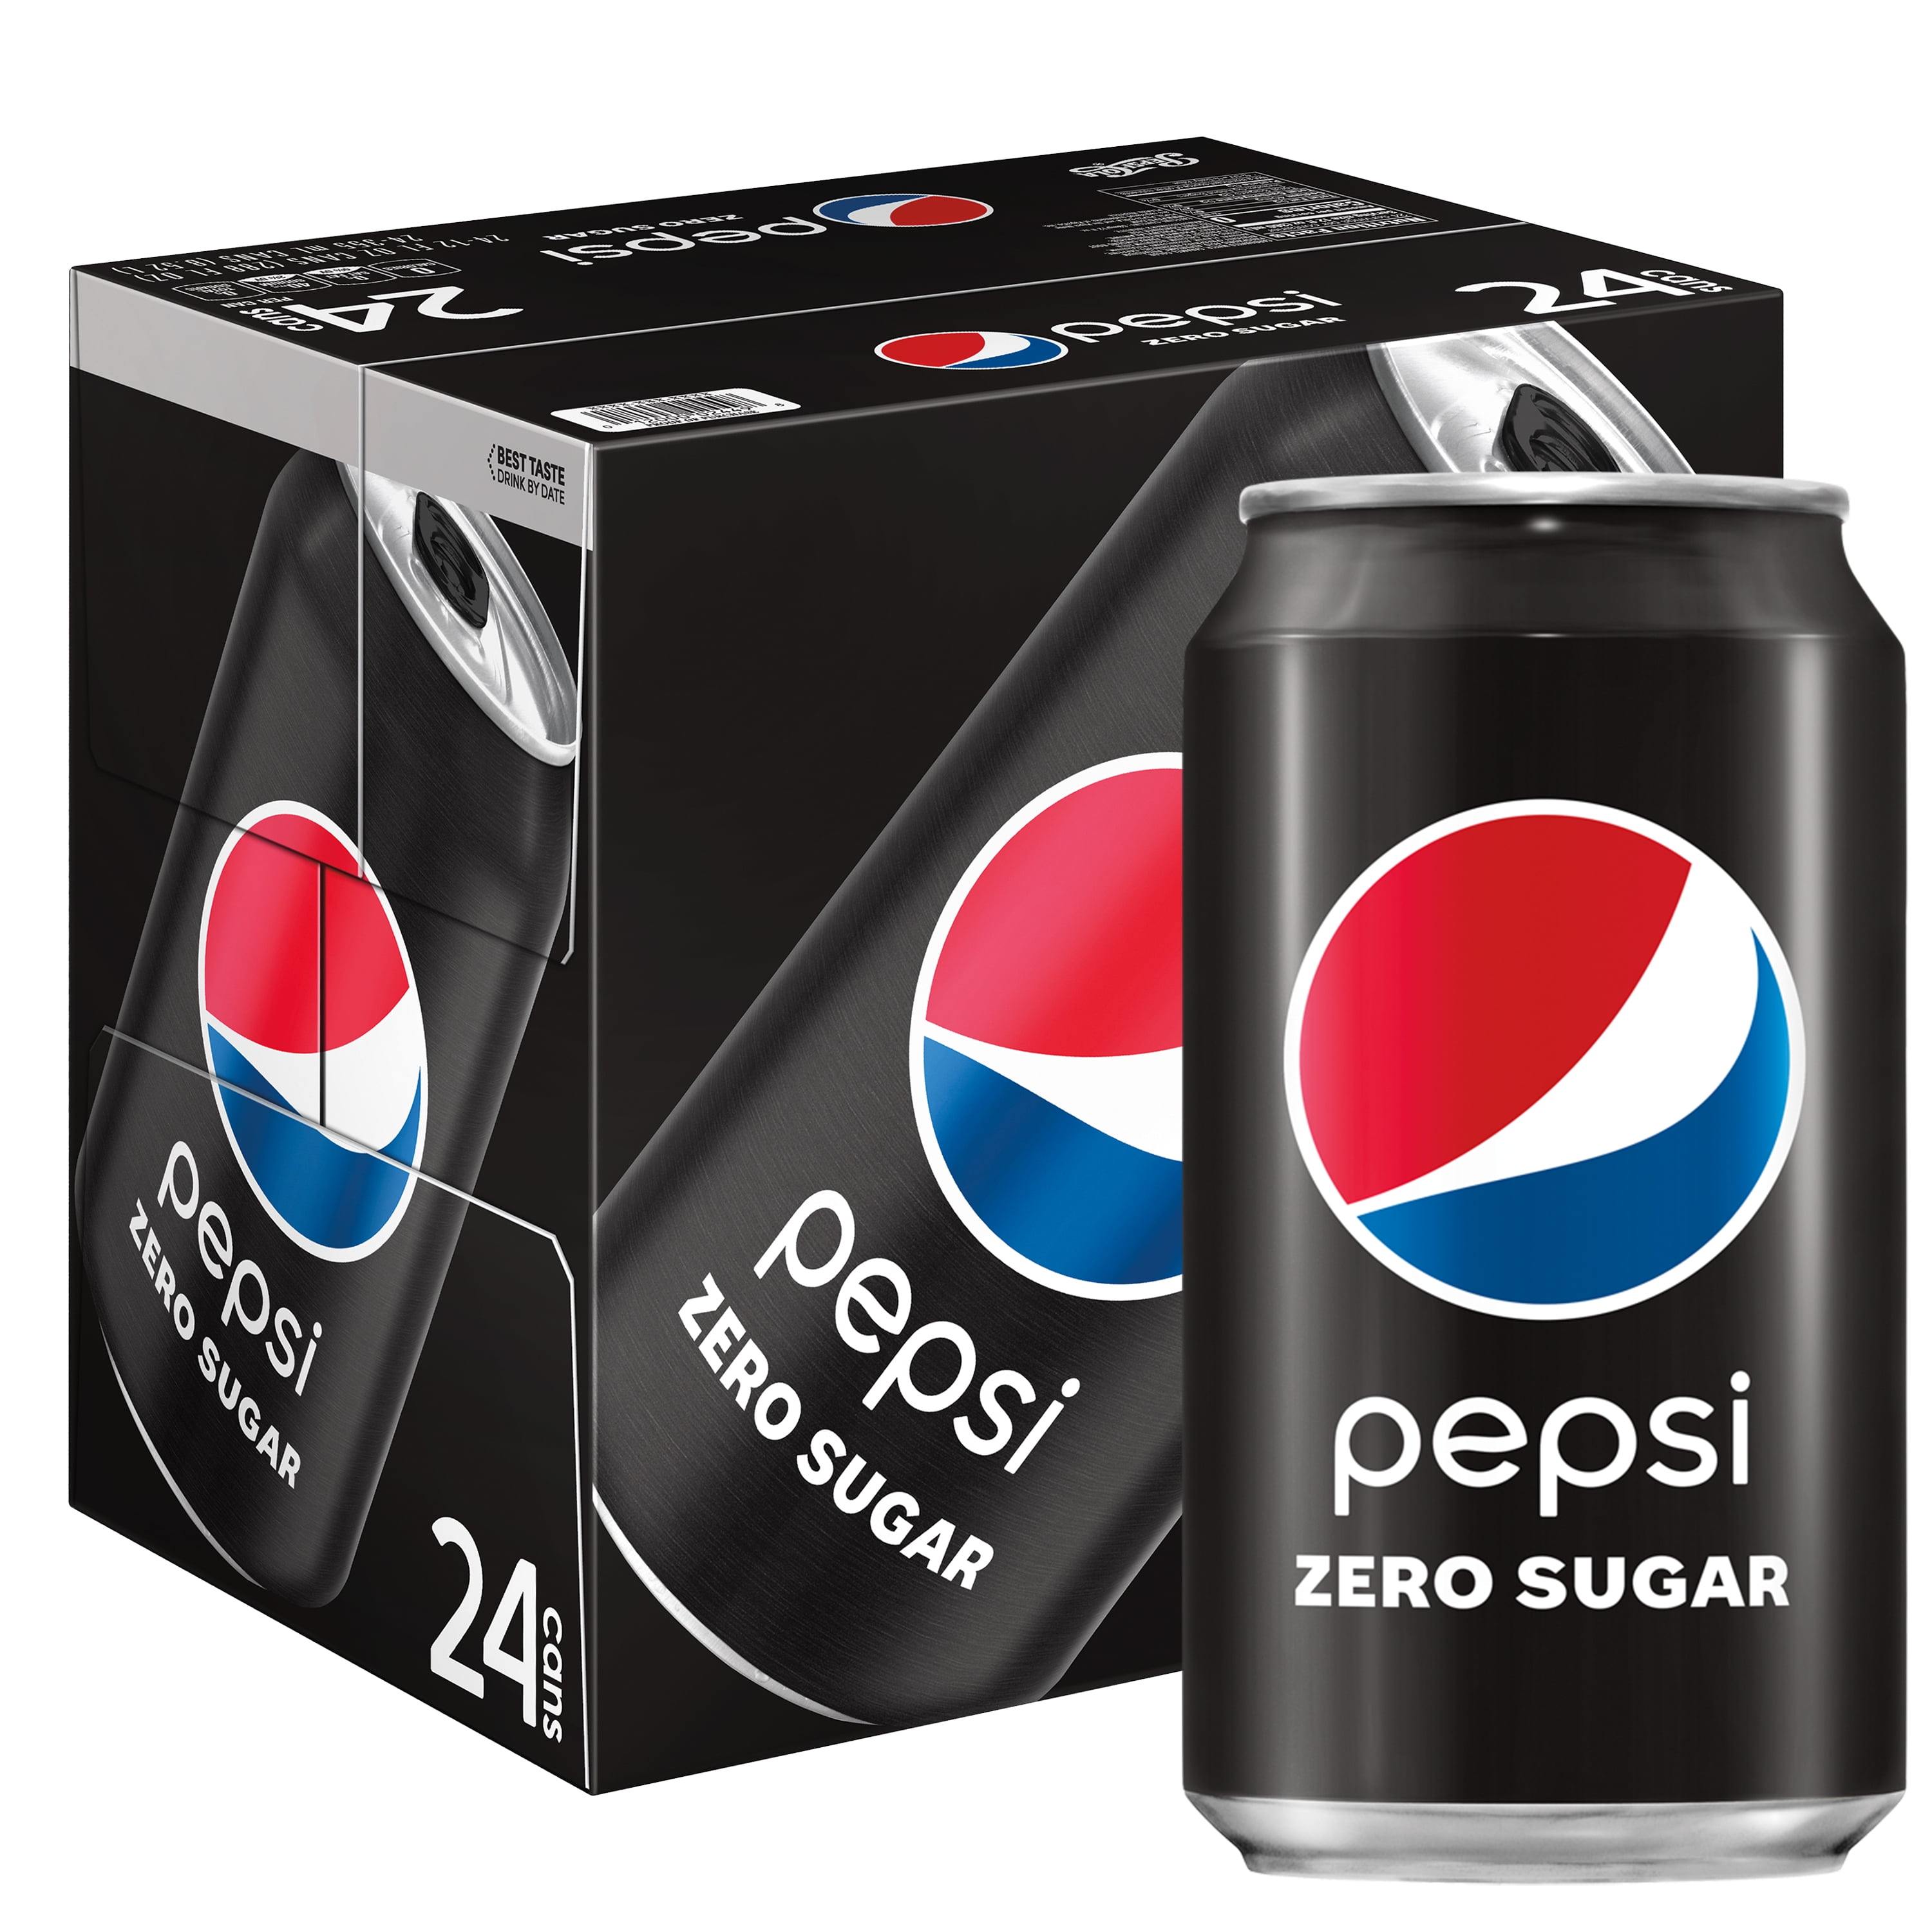 Buy Pepsi Cola Zero Sugar Soda Pop 12 Oz 24 Pack Cans Online At Lowest Price In Ubuy Kuwait 